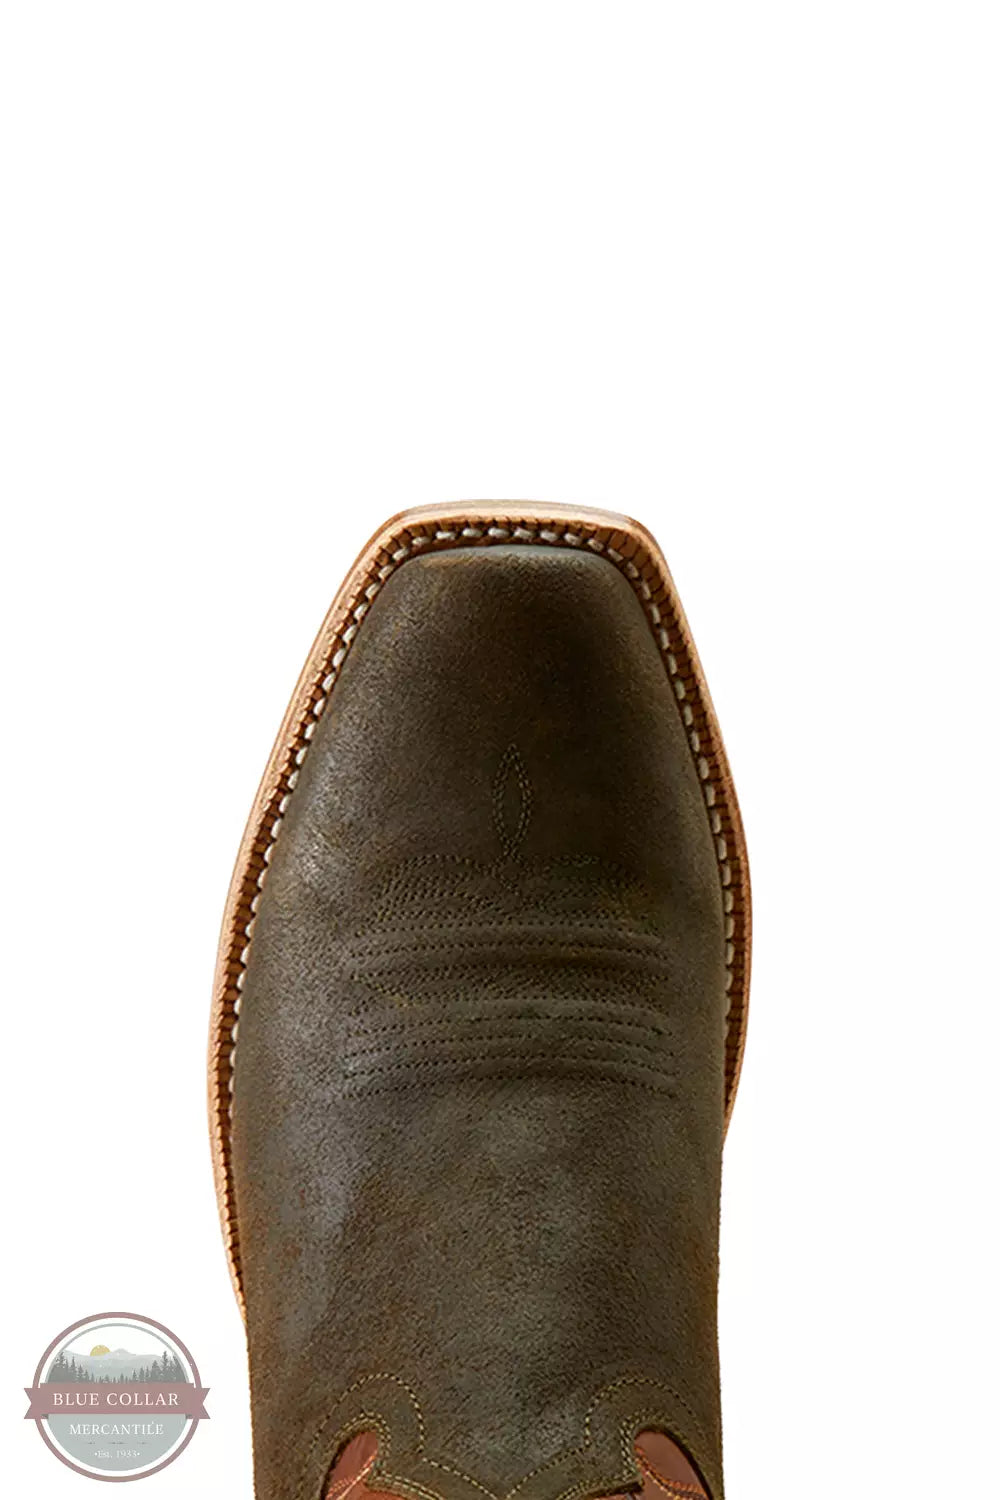 Ariat 10047717 Futurity Time Western Boot Toe View